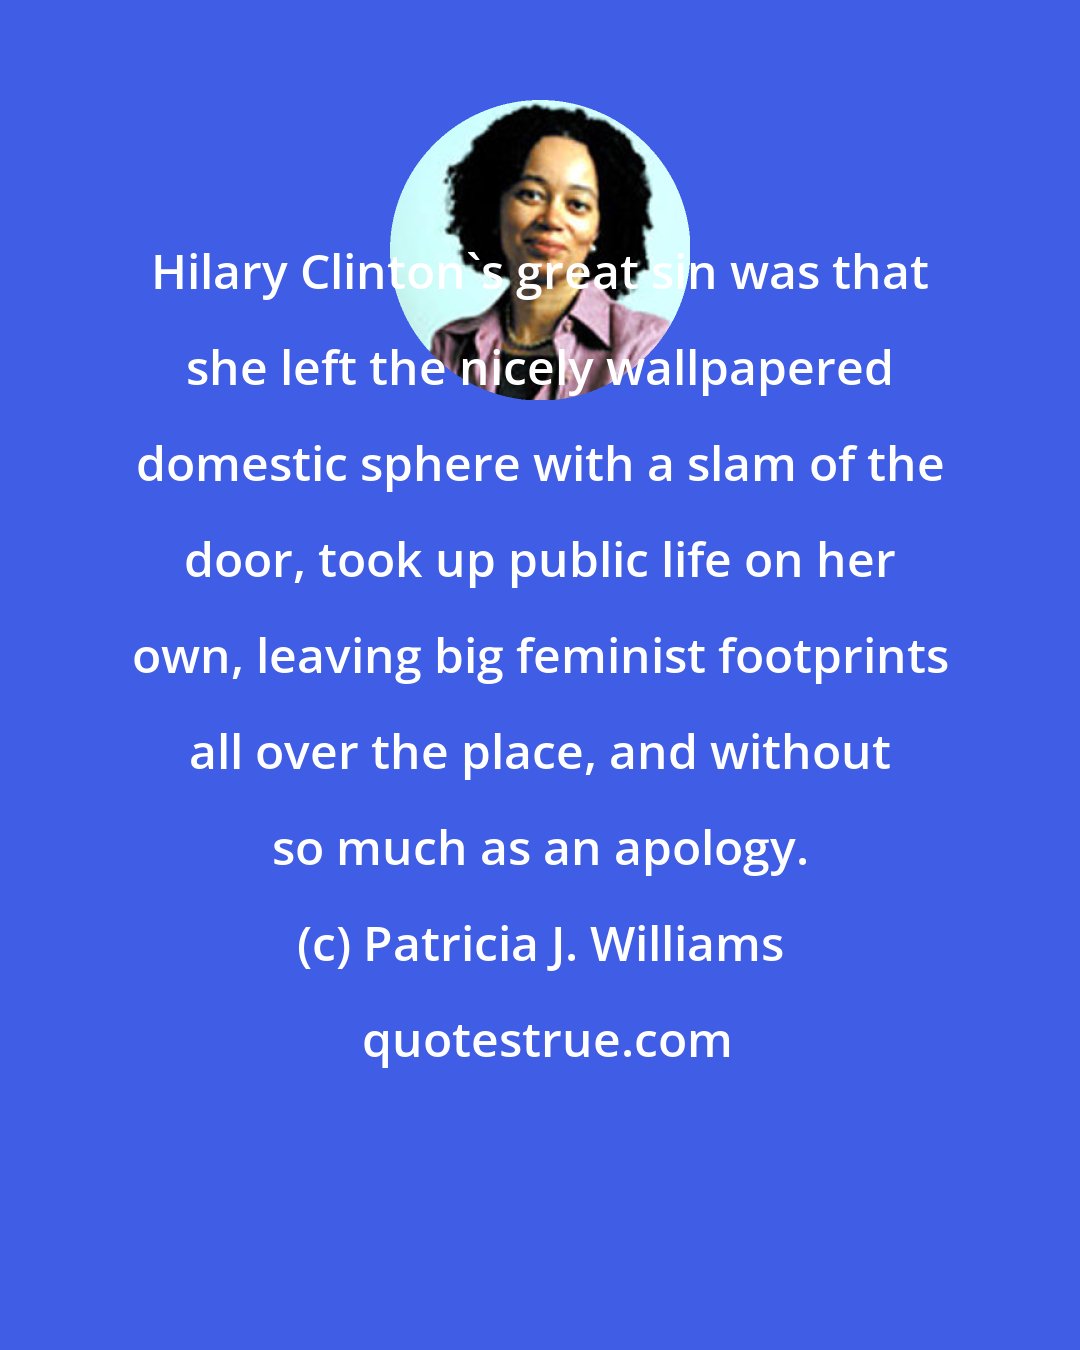 Patricia J. Williams: Hilary Clinton's great sin was that she left the nicely wallpapered domestic sphere with a slam of the door, took up public life on her own, leaving big feminist footprints all over the place, and without so much as an apology.